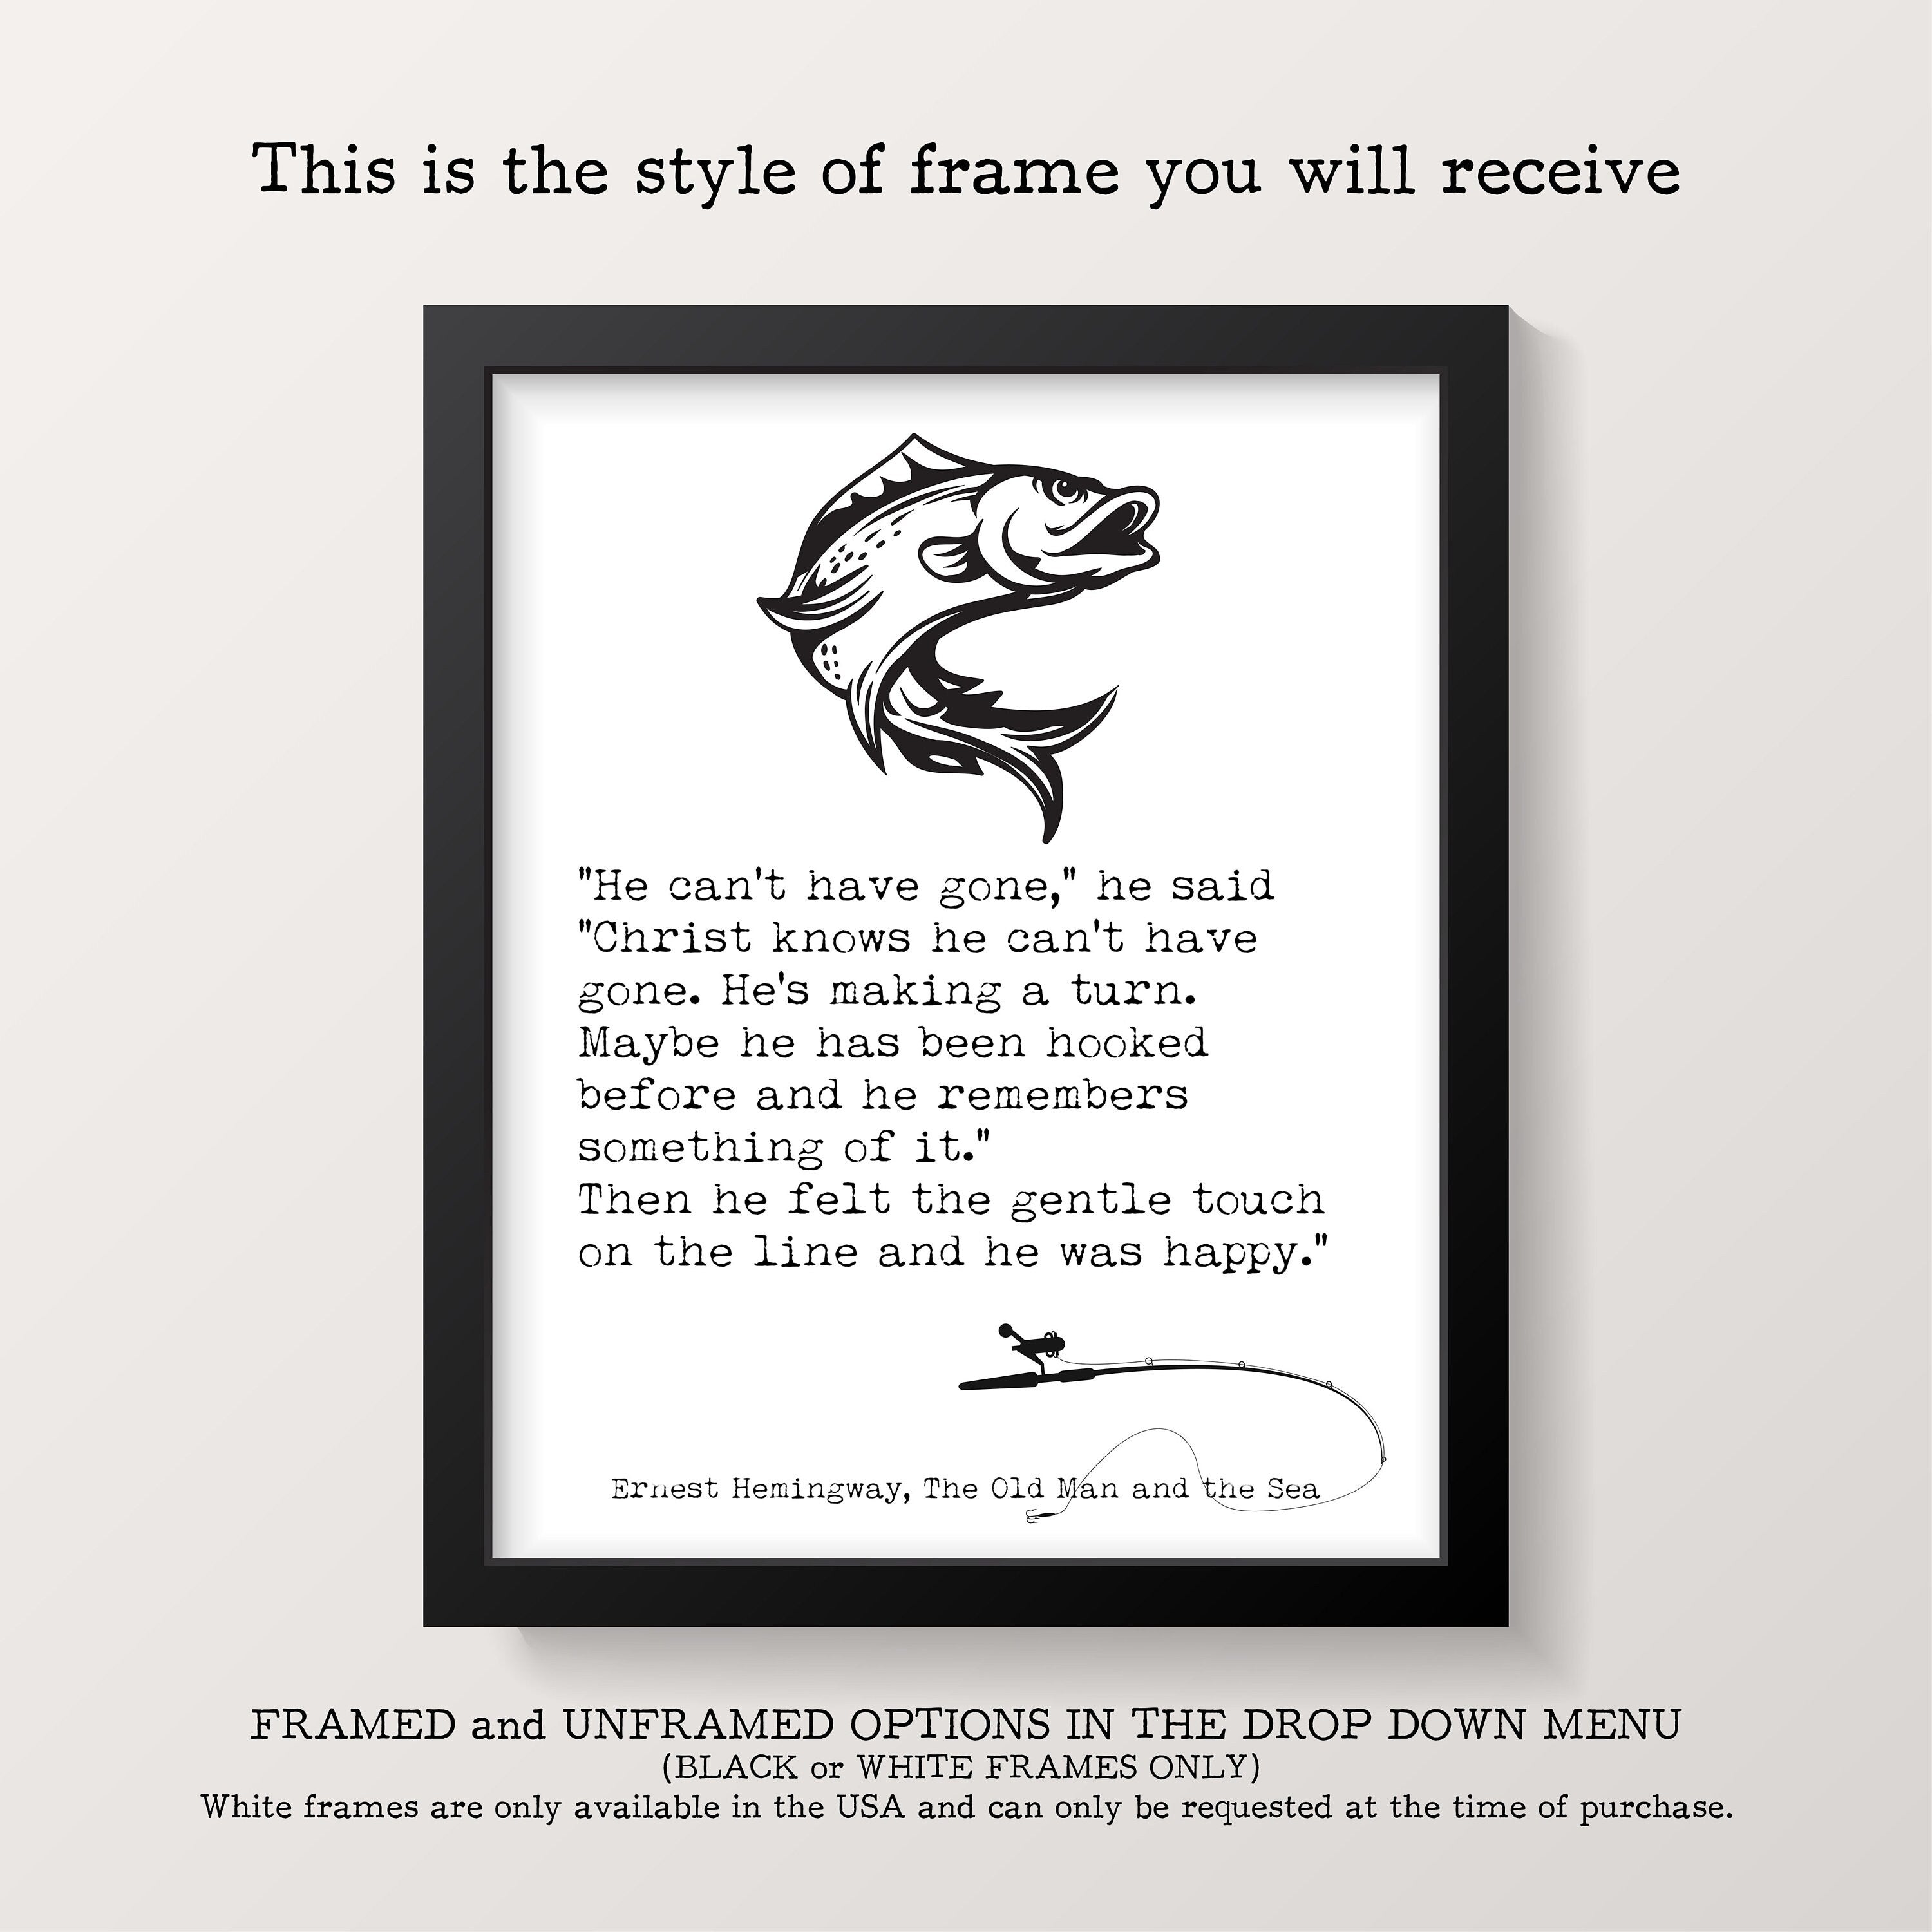 Winnie the Pooh Art Print, I knew when I met you an adventure was going to happen Quote Wall Art in black & White